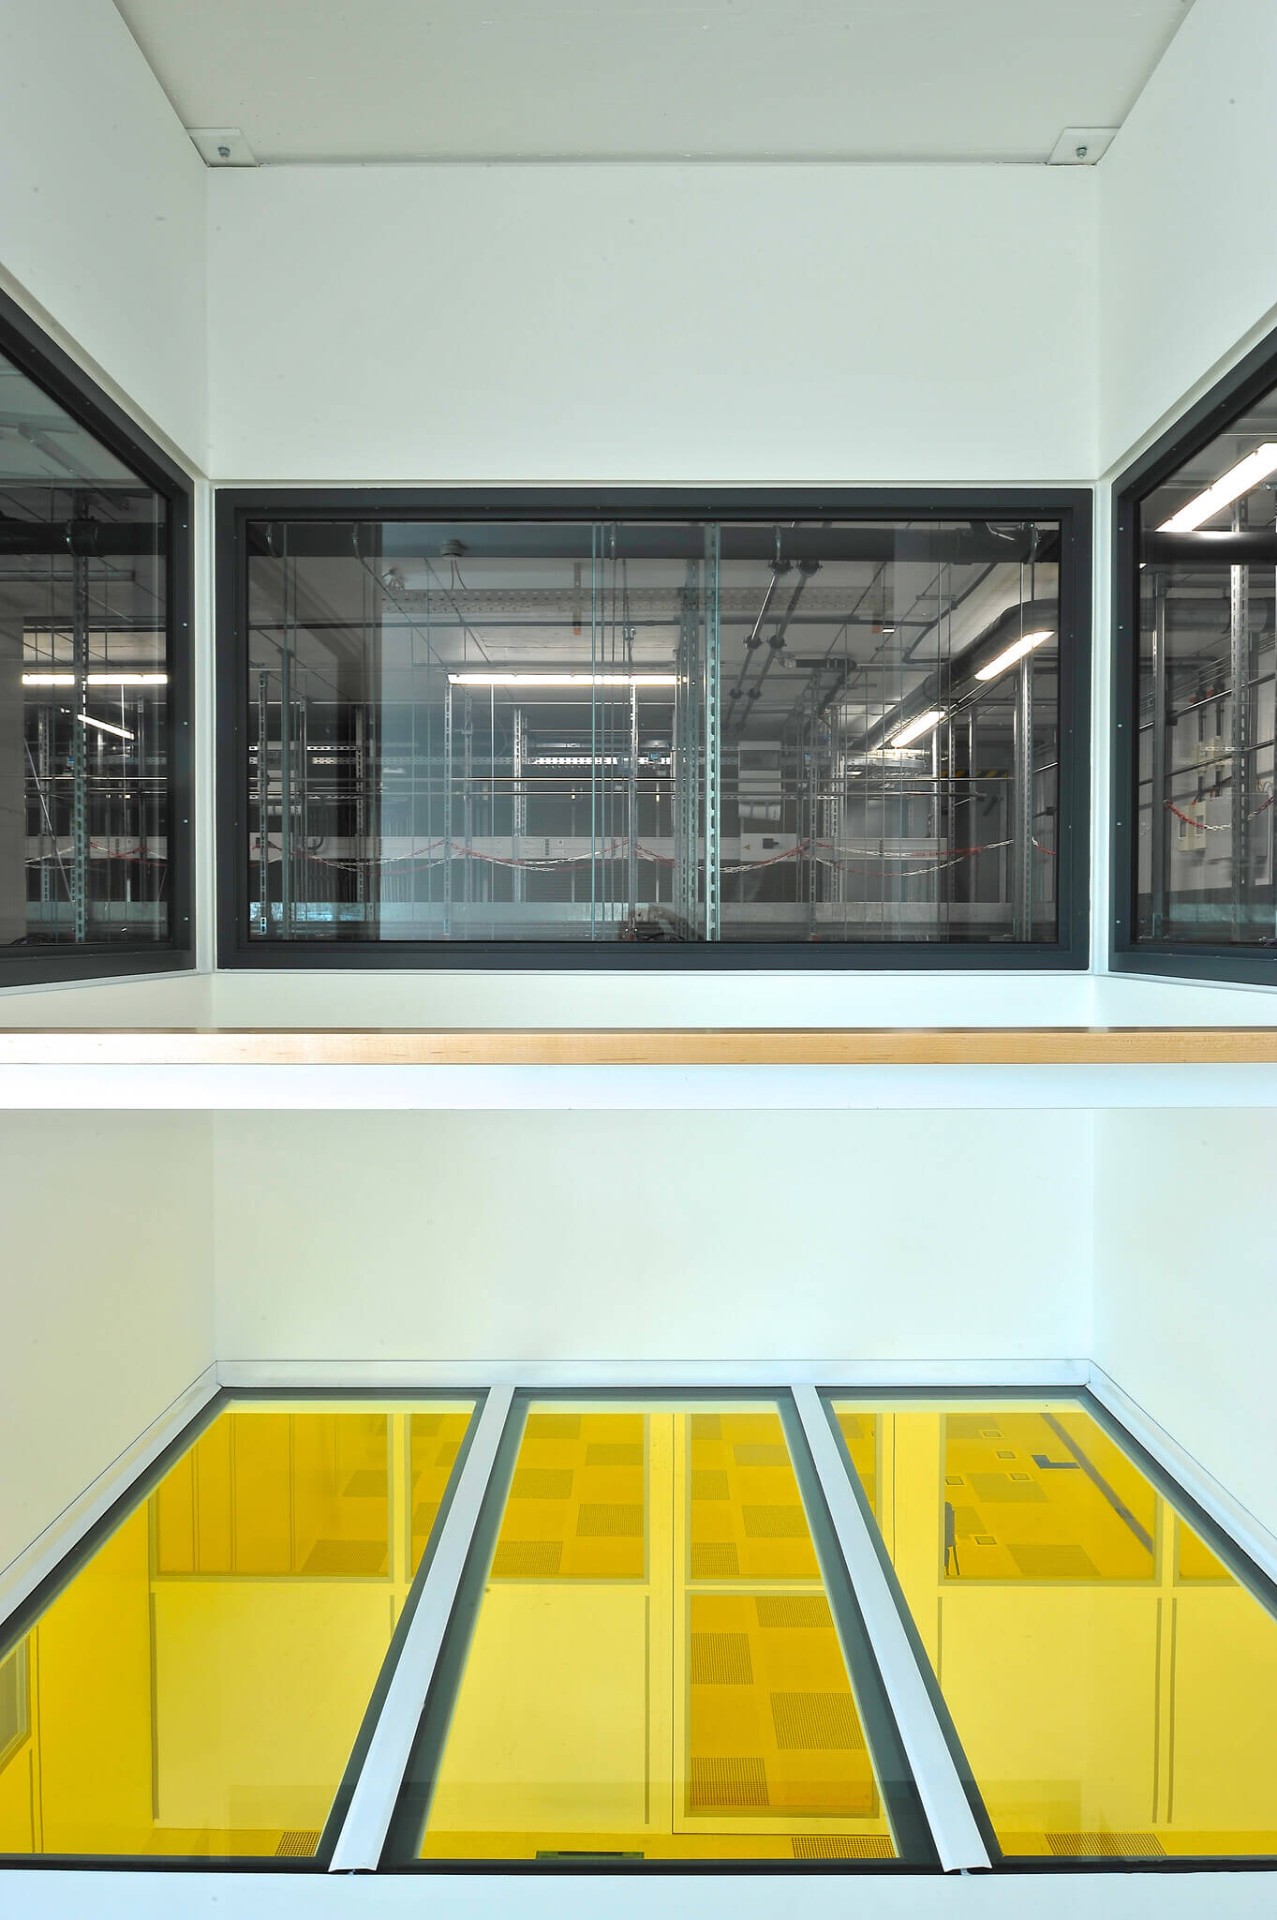 Center for High Efficiency Solar Cells: It is possible to look into the clean room and the ventilation space above from the visitors’ hall of the new building. 